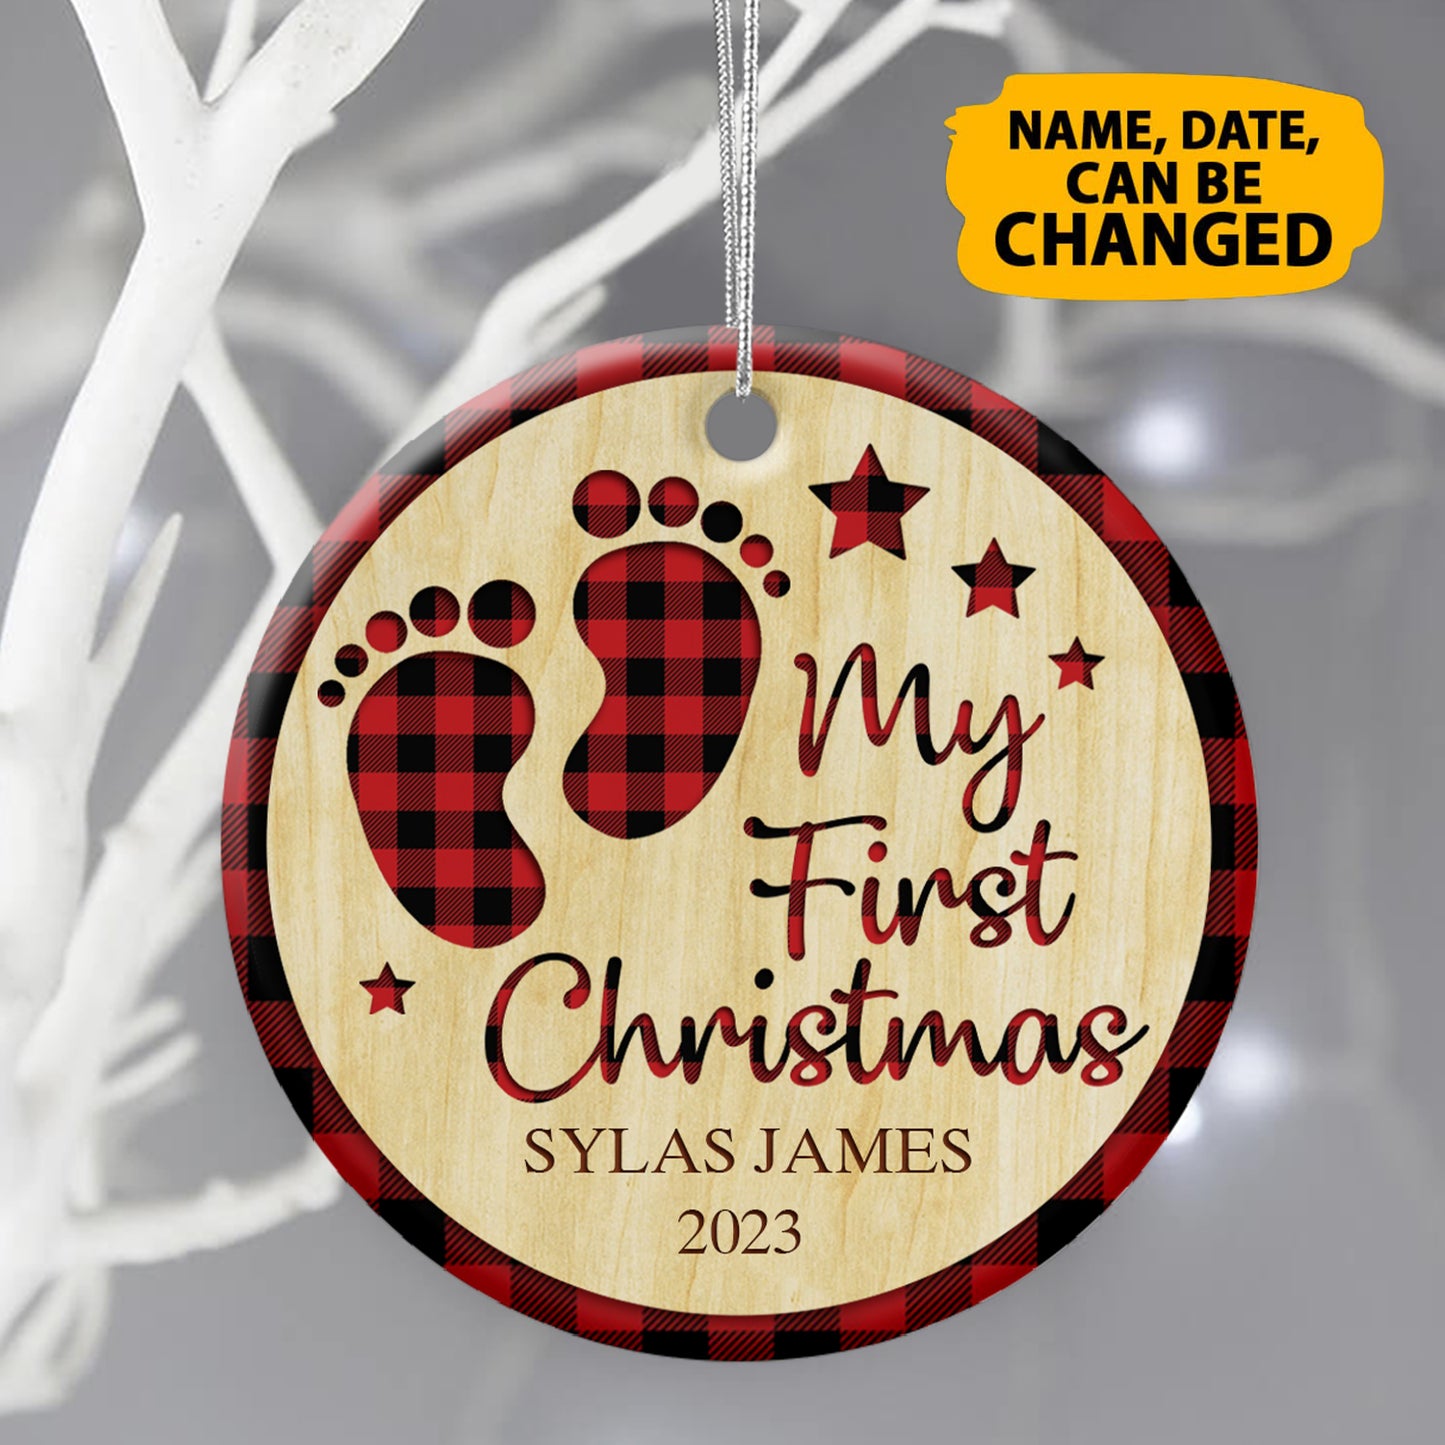 Personalized Baby's First Christmas Ceramic Circle Ornament